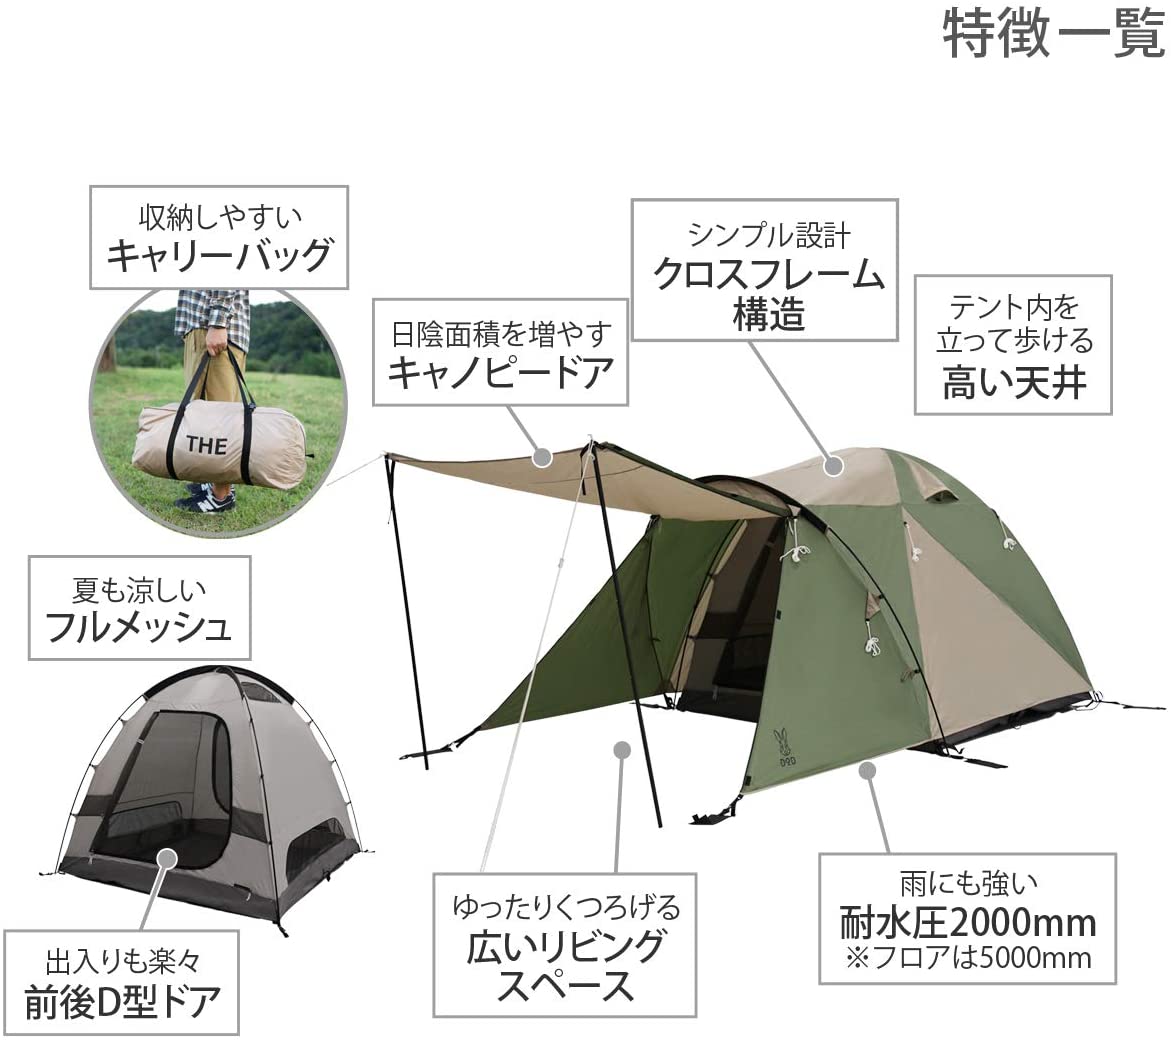 the tent M